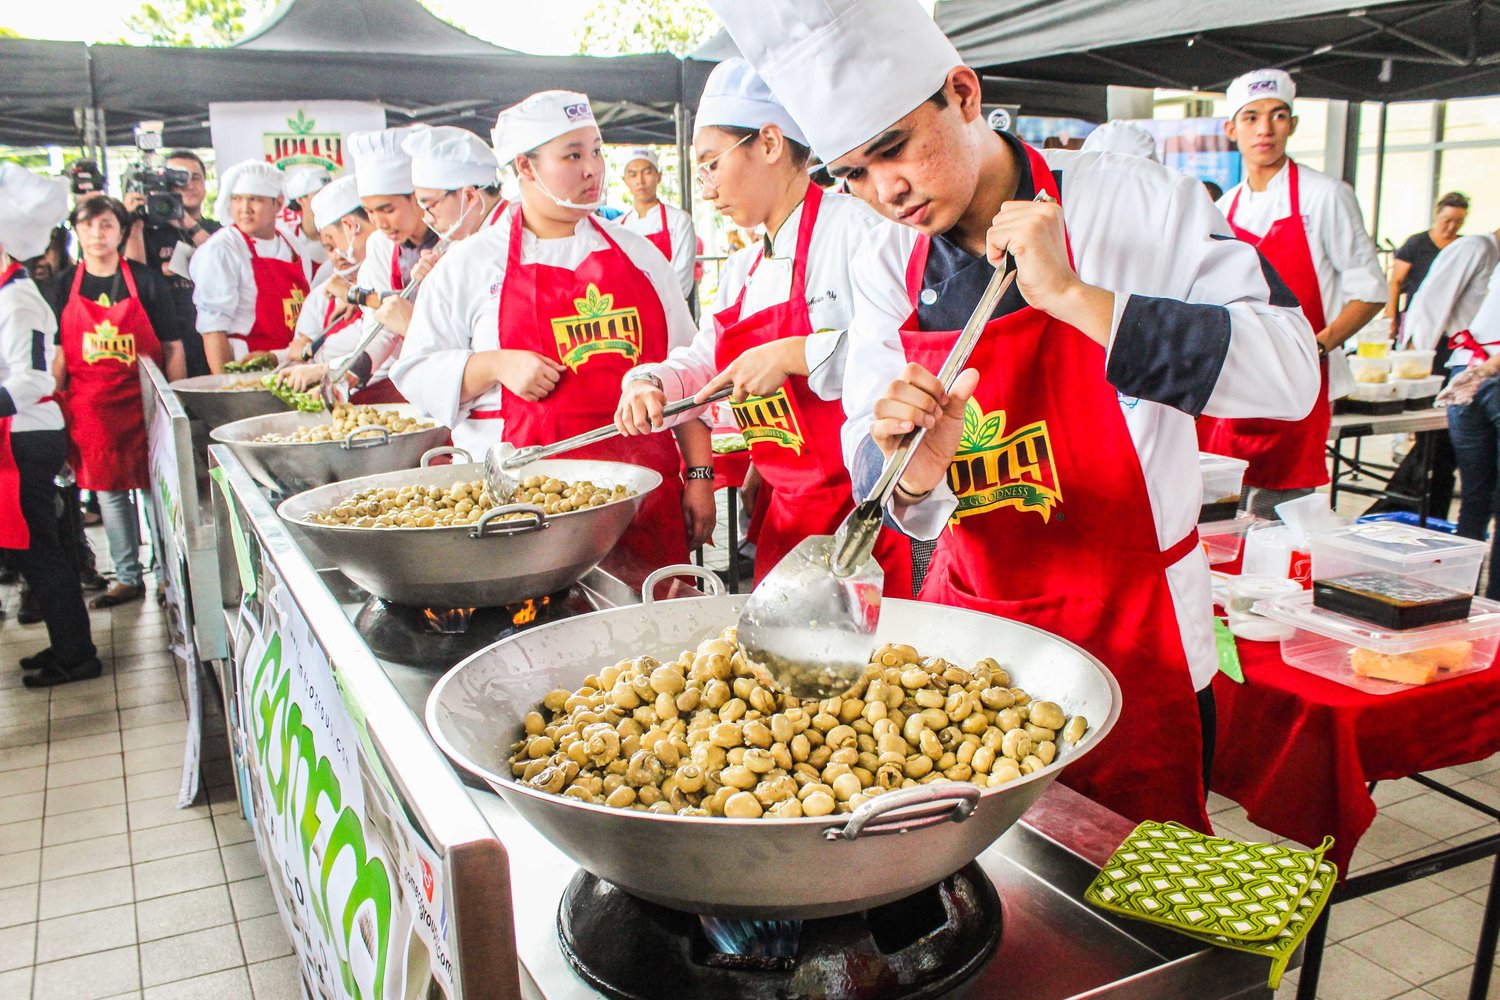 Cookign-Stations.-Students-from-CCA-cooking-over-300-kg-of-mushroom-to-make-the-world-record..jpg